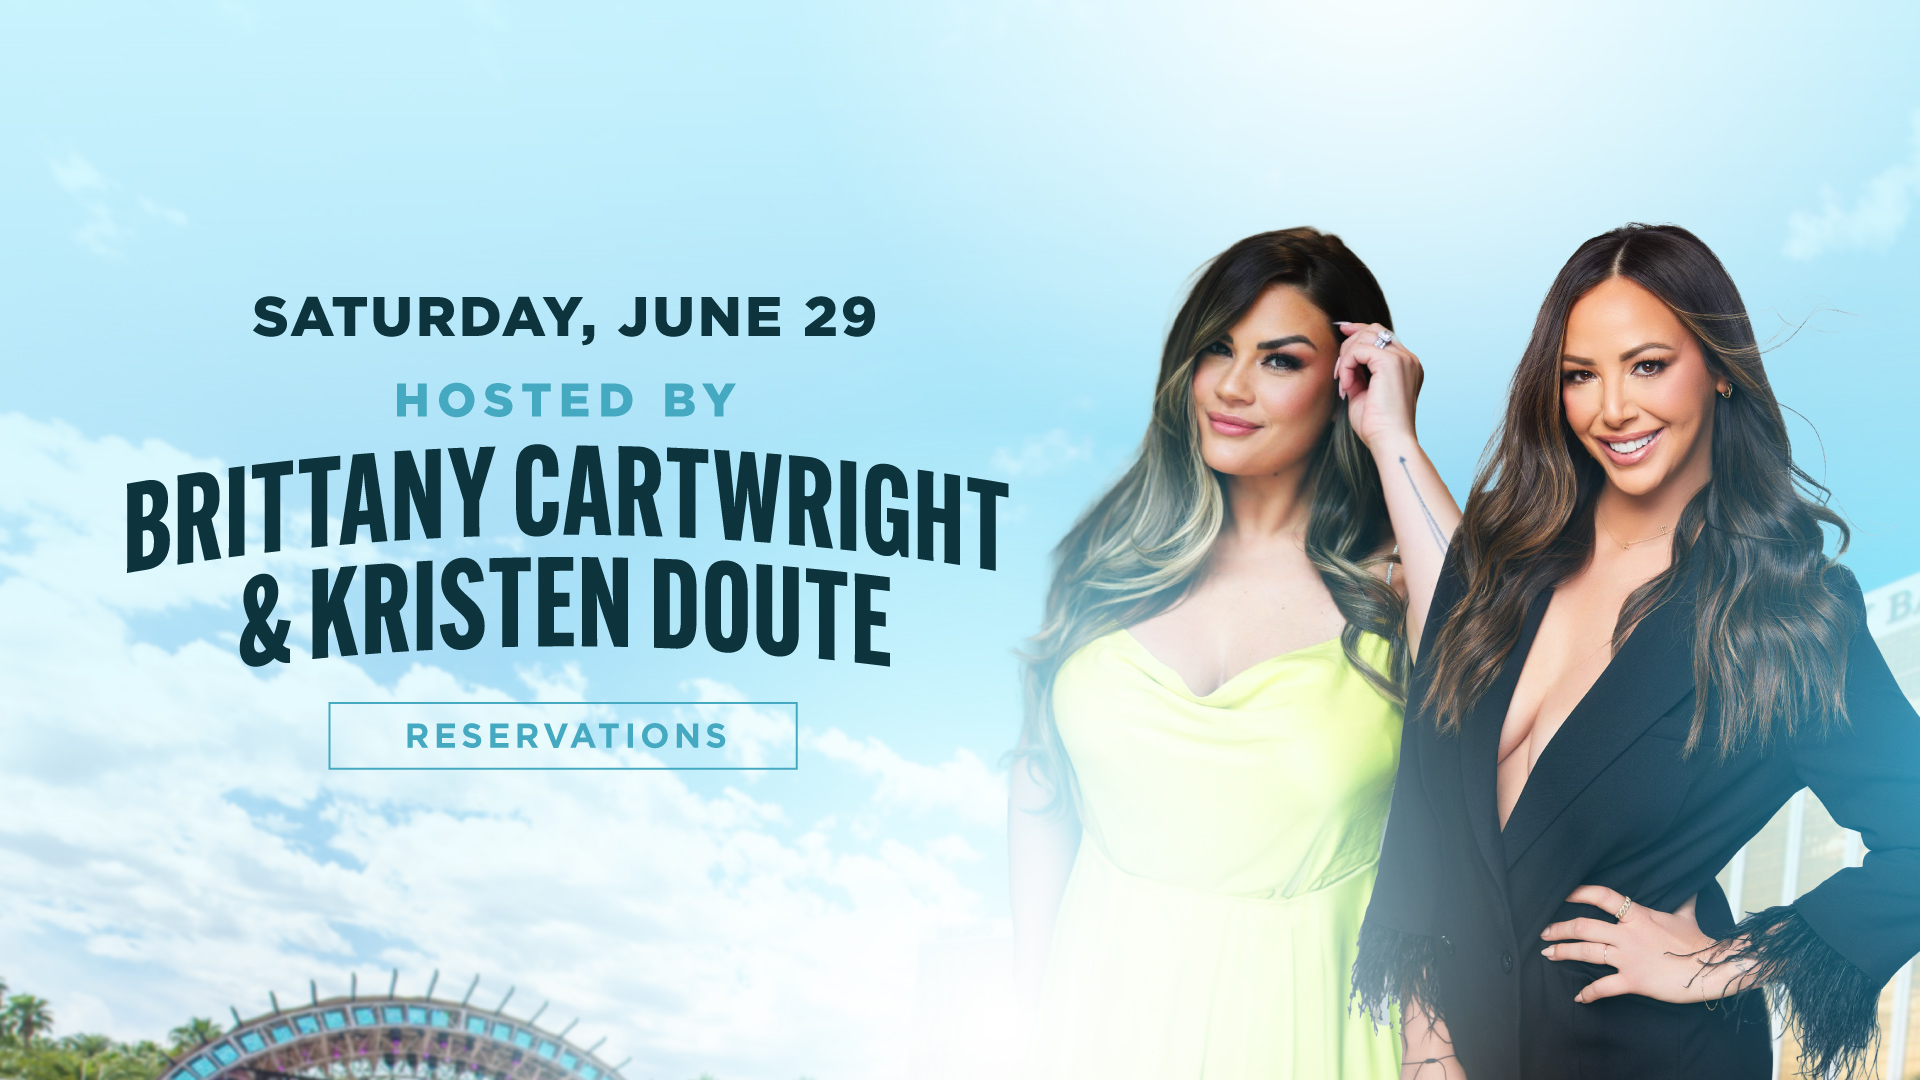 On Saturday, June 29th, Daylight Beach Club will host an exclusive event featuring Brittany Cartwright and Kristen Doute from the hit reality show Vanderpump Rules and the highly anticipated new show The Valley. These reality TV stars will not only be hosting but also guest bartending, bringing their unique flair and vibrant personalities to the poolside.